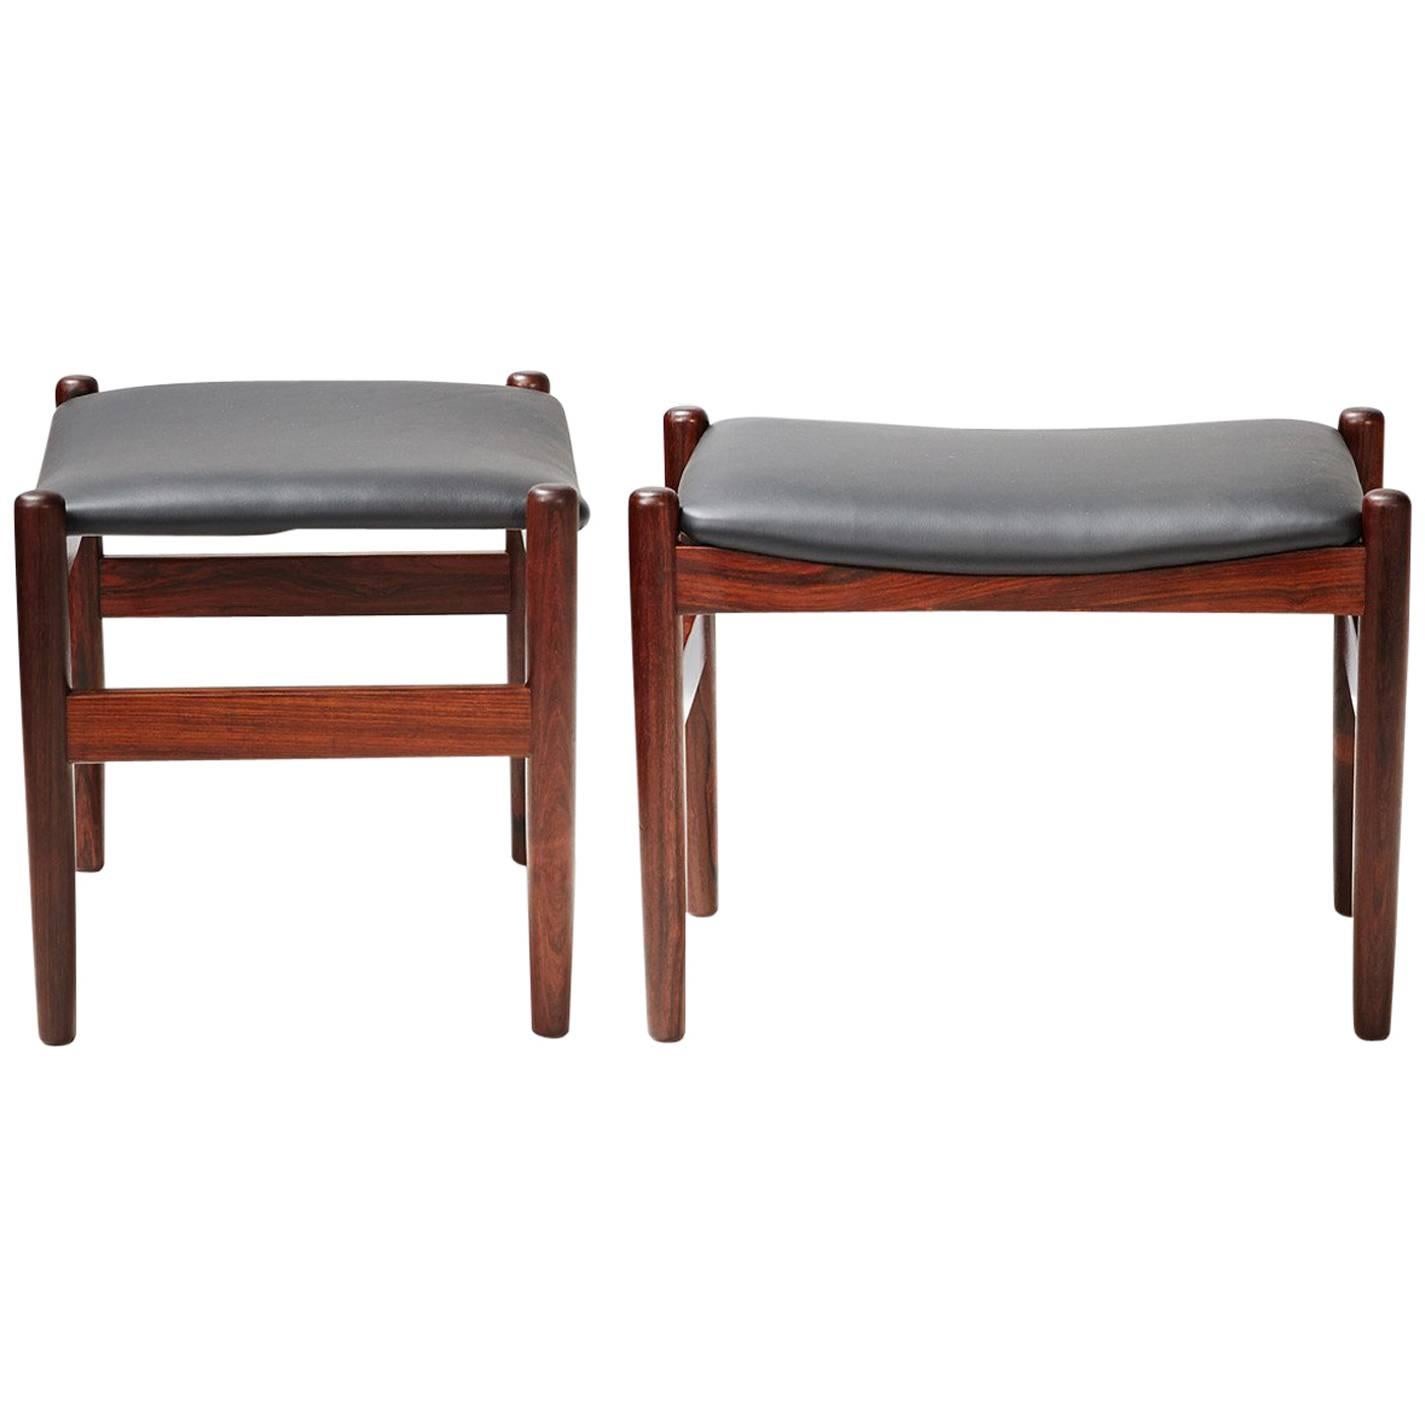 Rosewood and Leather Stools by Unknown Danish Designer, 1960s